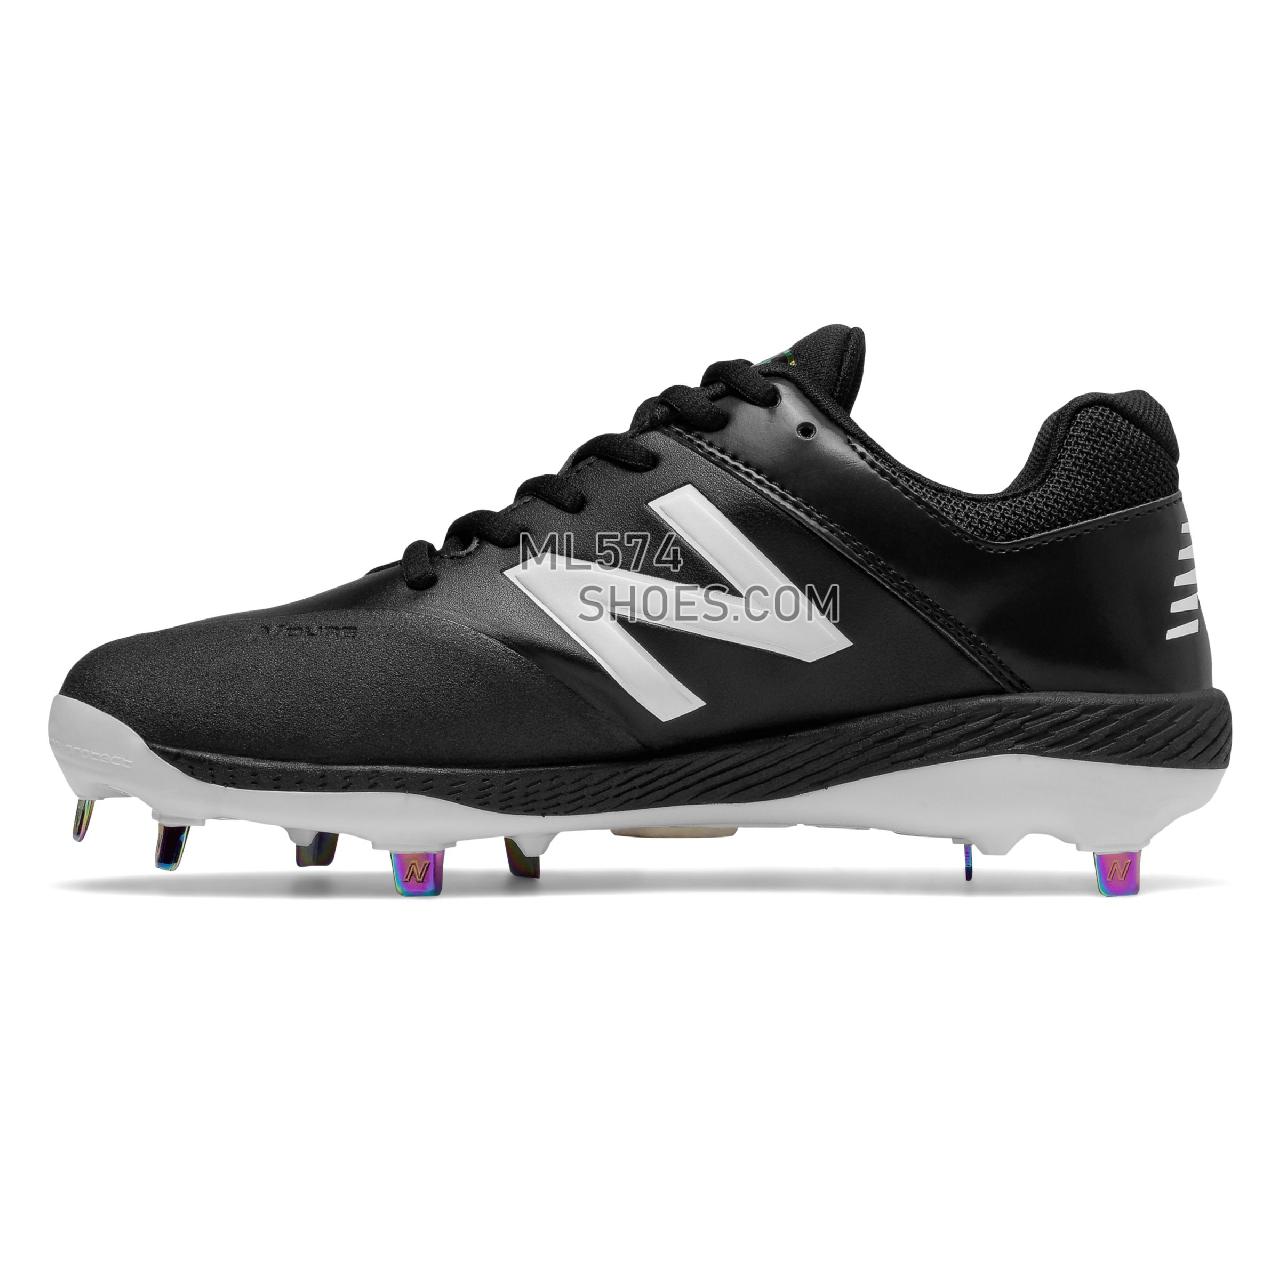 New Balance Low-Cut Fuse1 Metal Cleat - Women's 1 - Baseball Black with White - SMFUSEK1